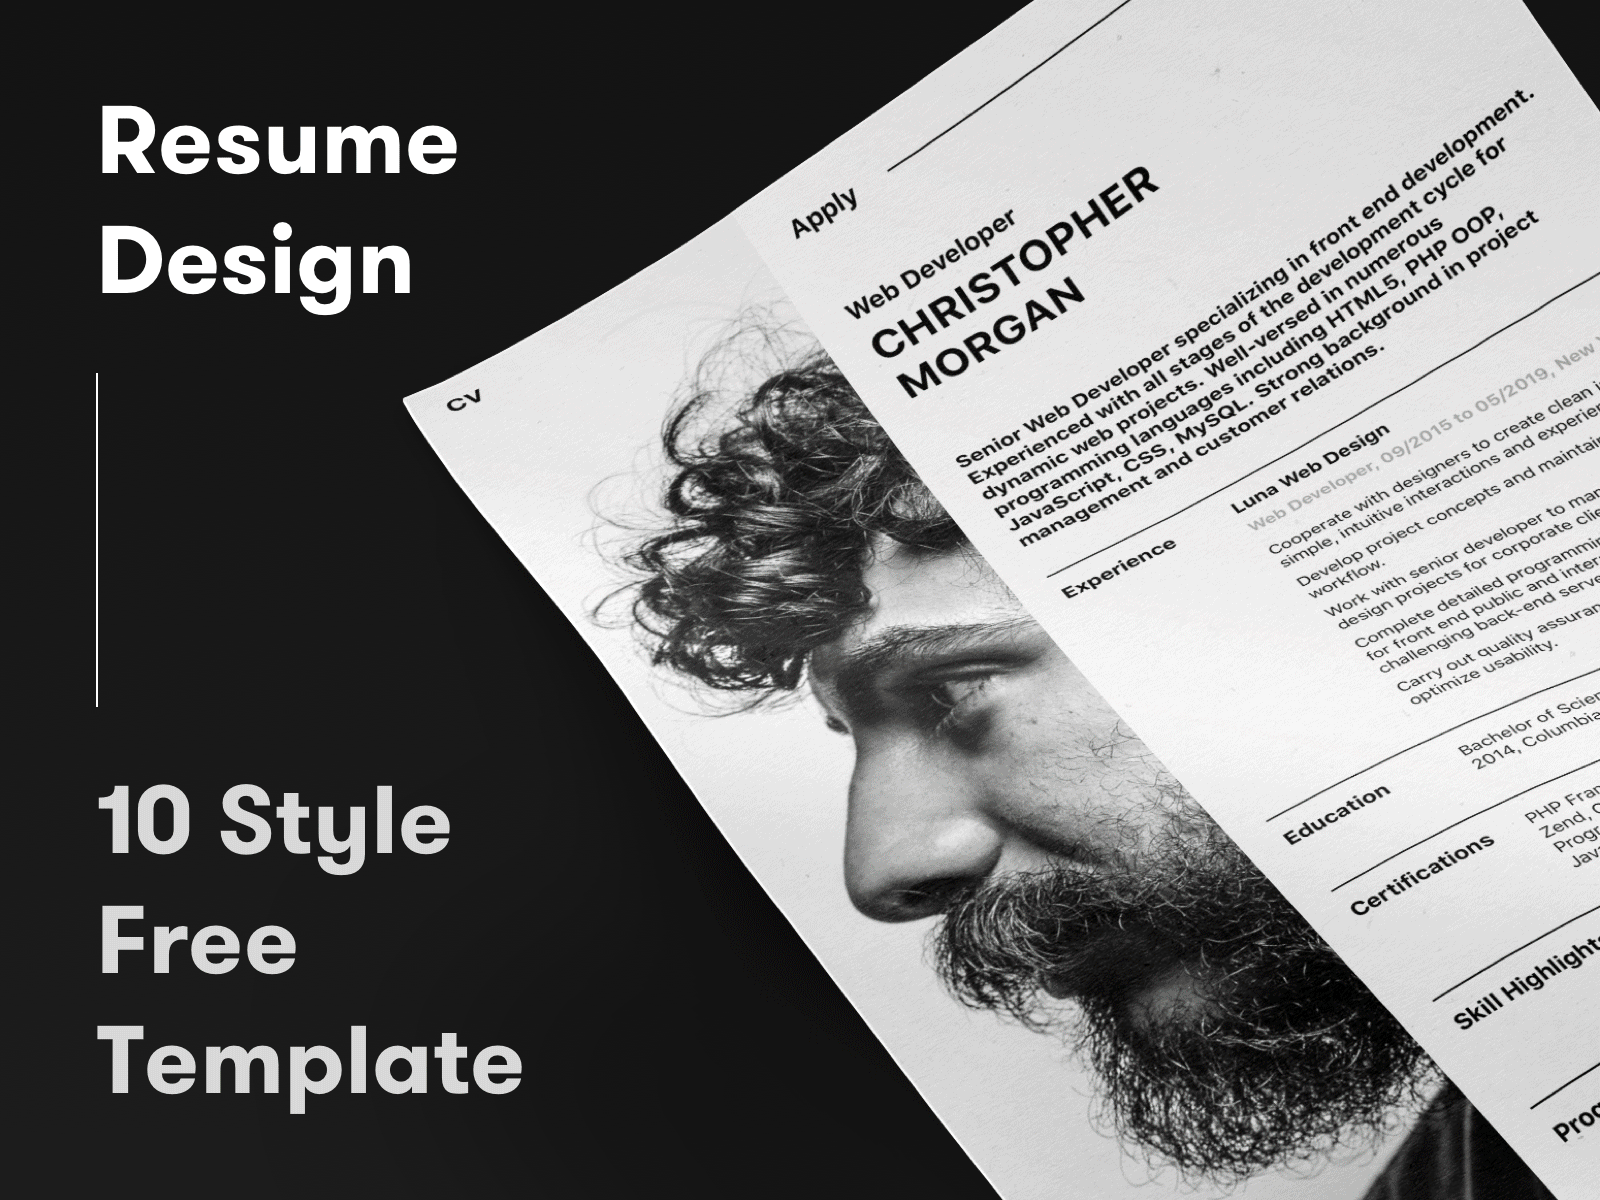 Resume Design - 10 Style Free Template